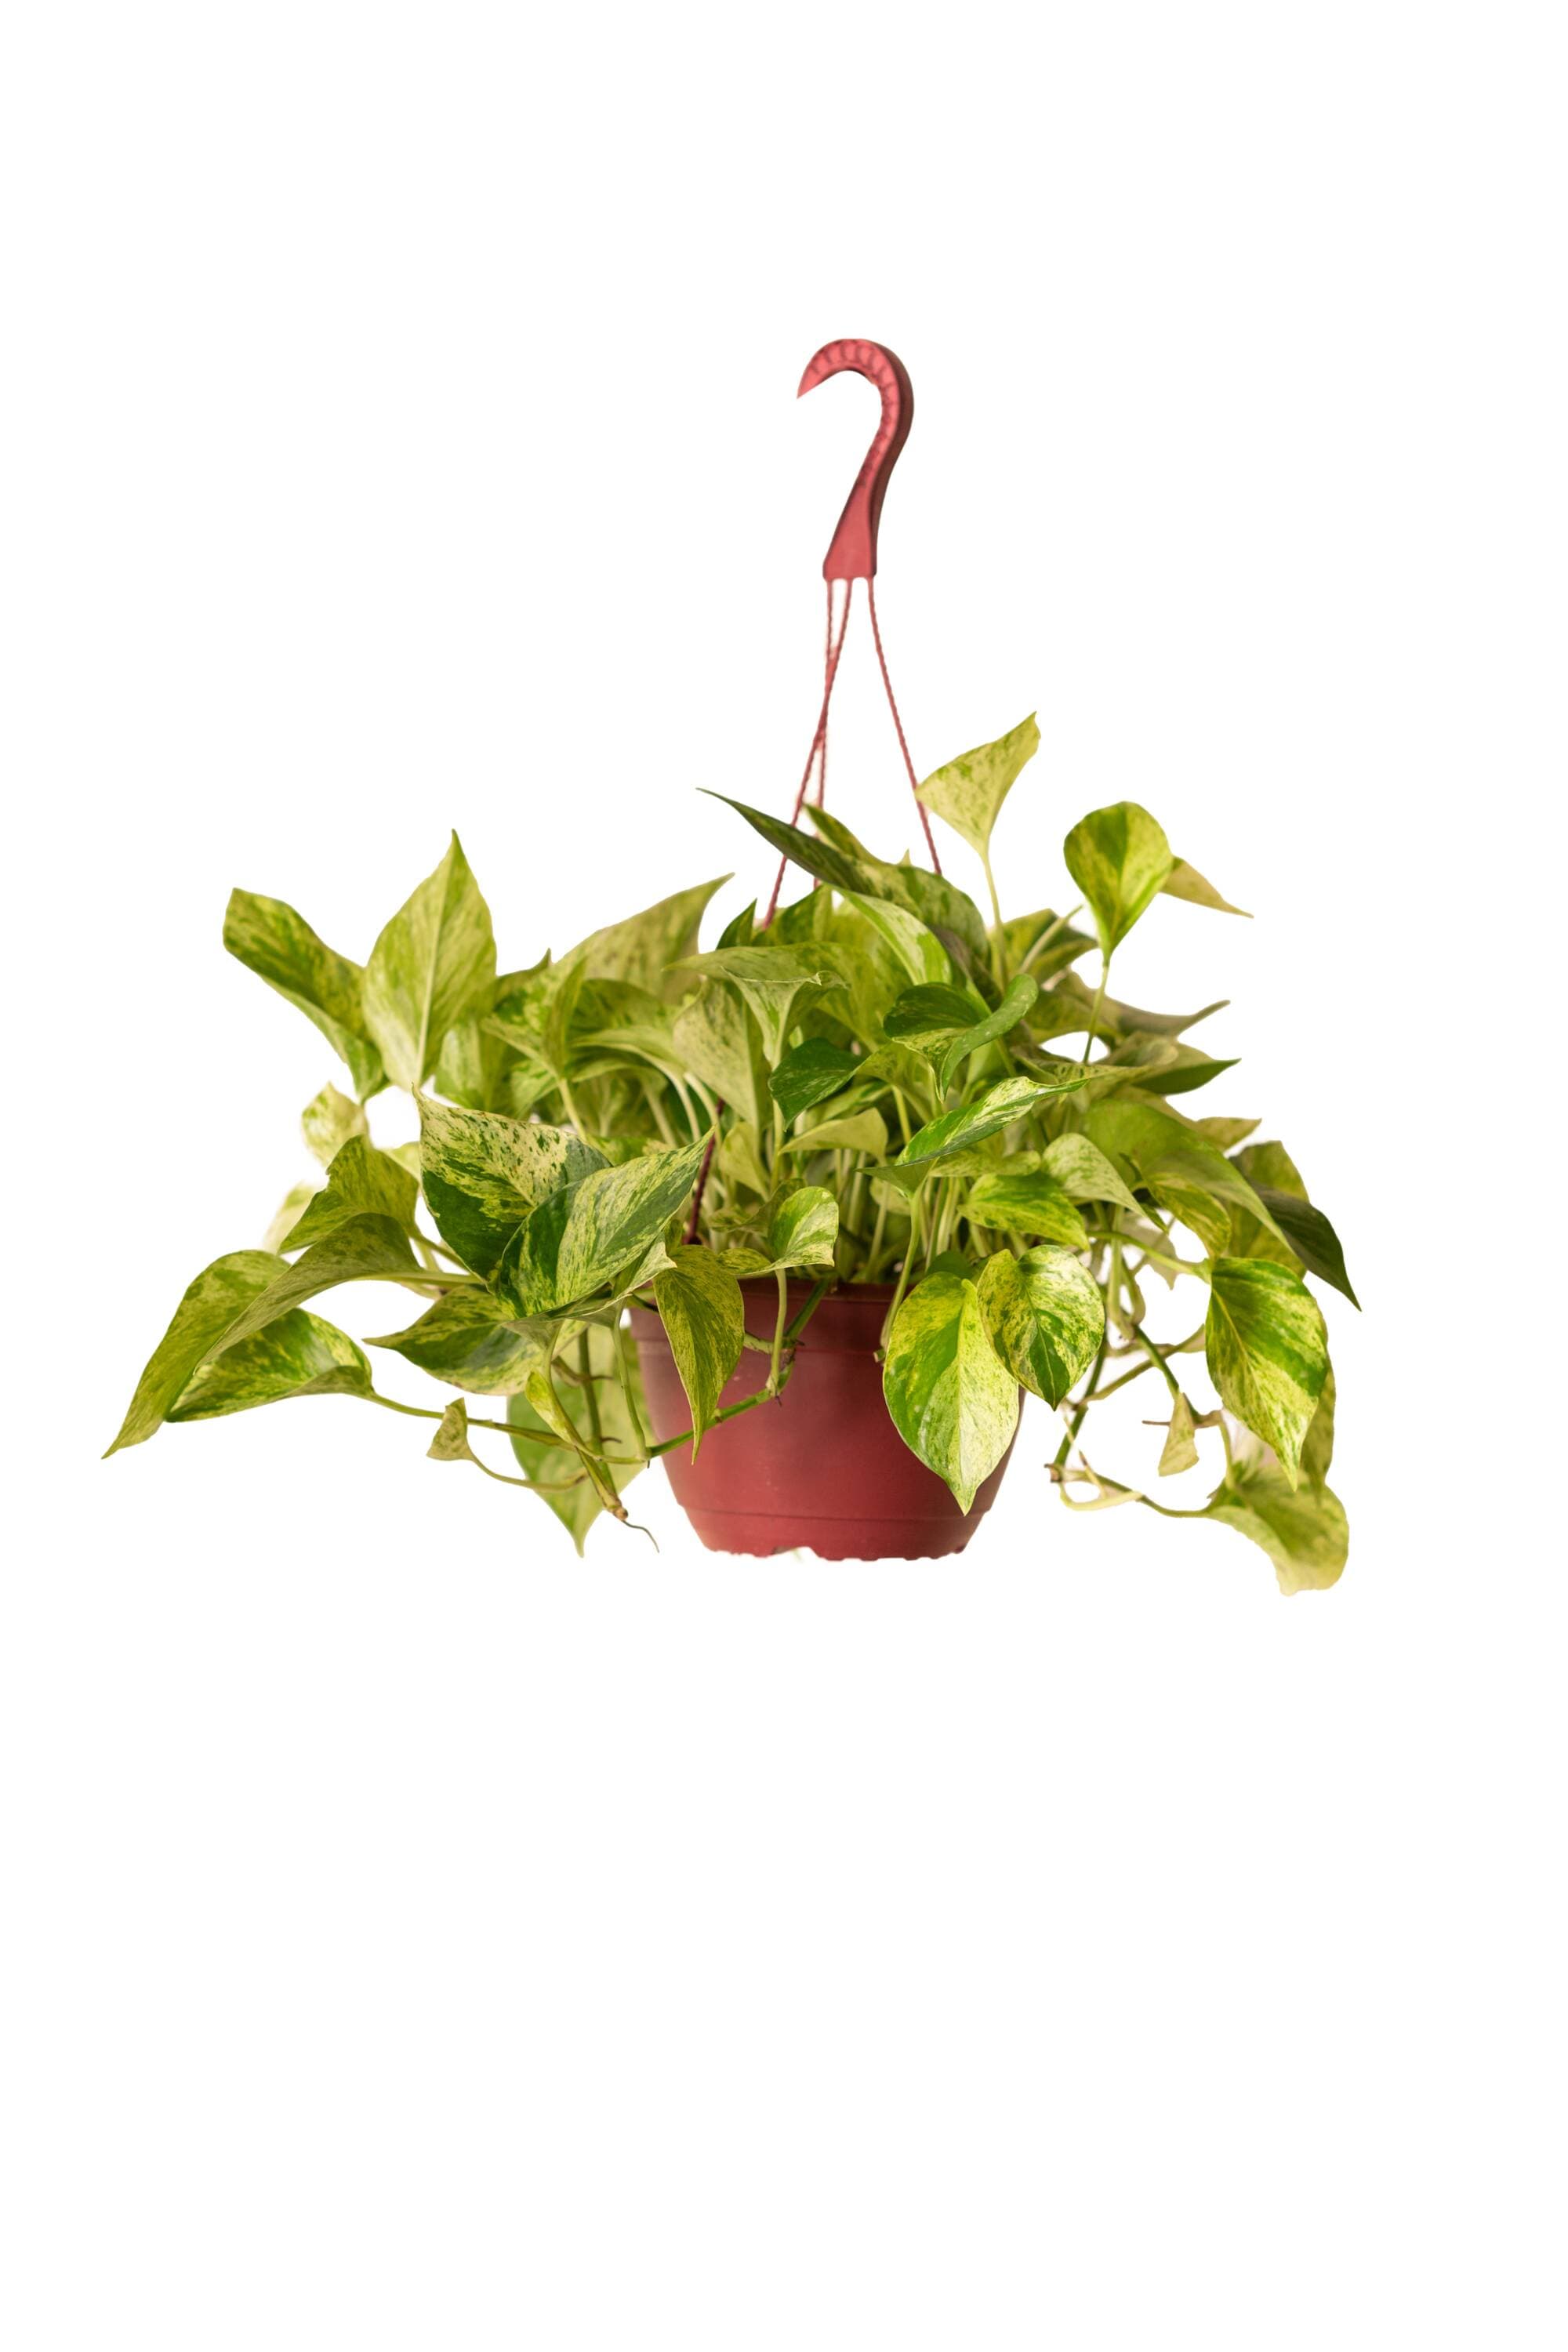 LiveTrends Live Marble Queen Pothos Hanging Plant Plant in Hanging Basket in the House Plants department at Lowes.com